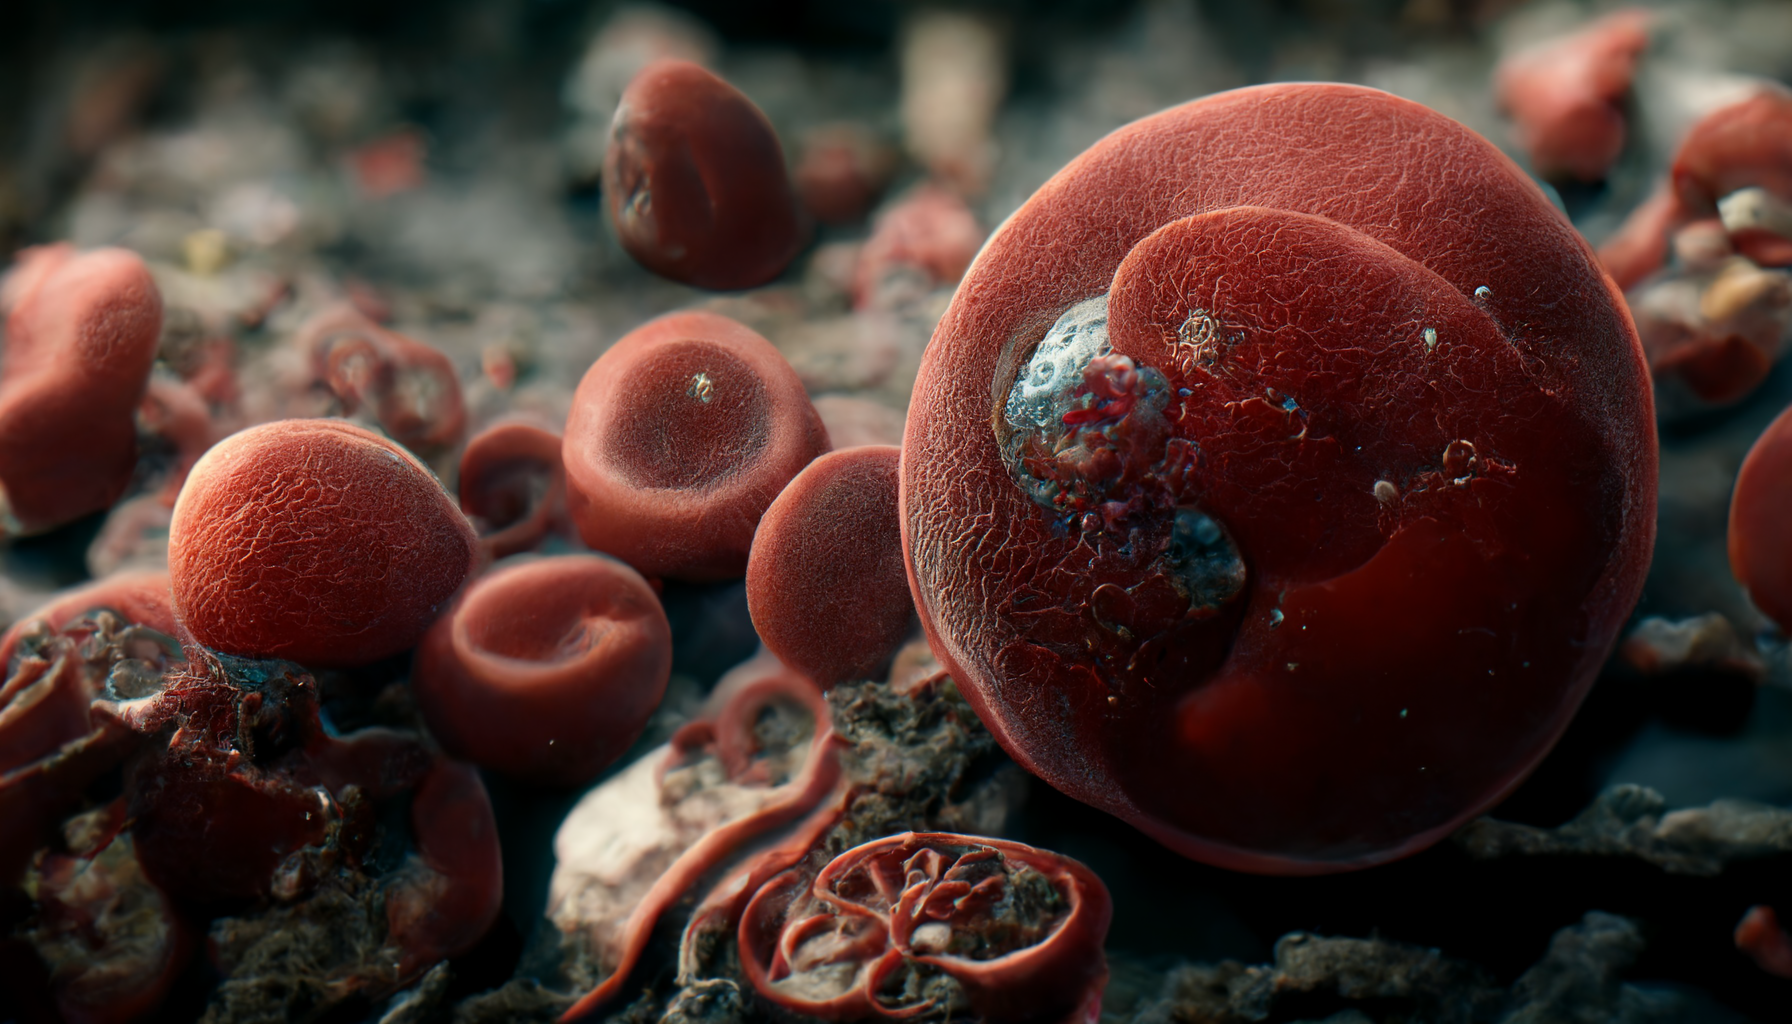 Christopher_A_erythrocyte_in_the_body_high_detail_8K_rendered_i_6d7fb935-5db9-4772-ae88-7d0be85df80f.png